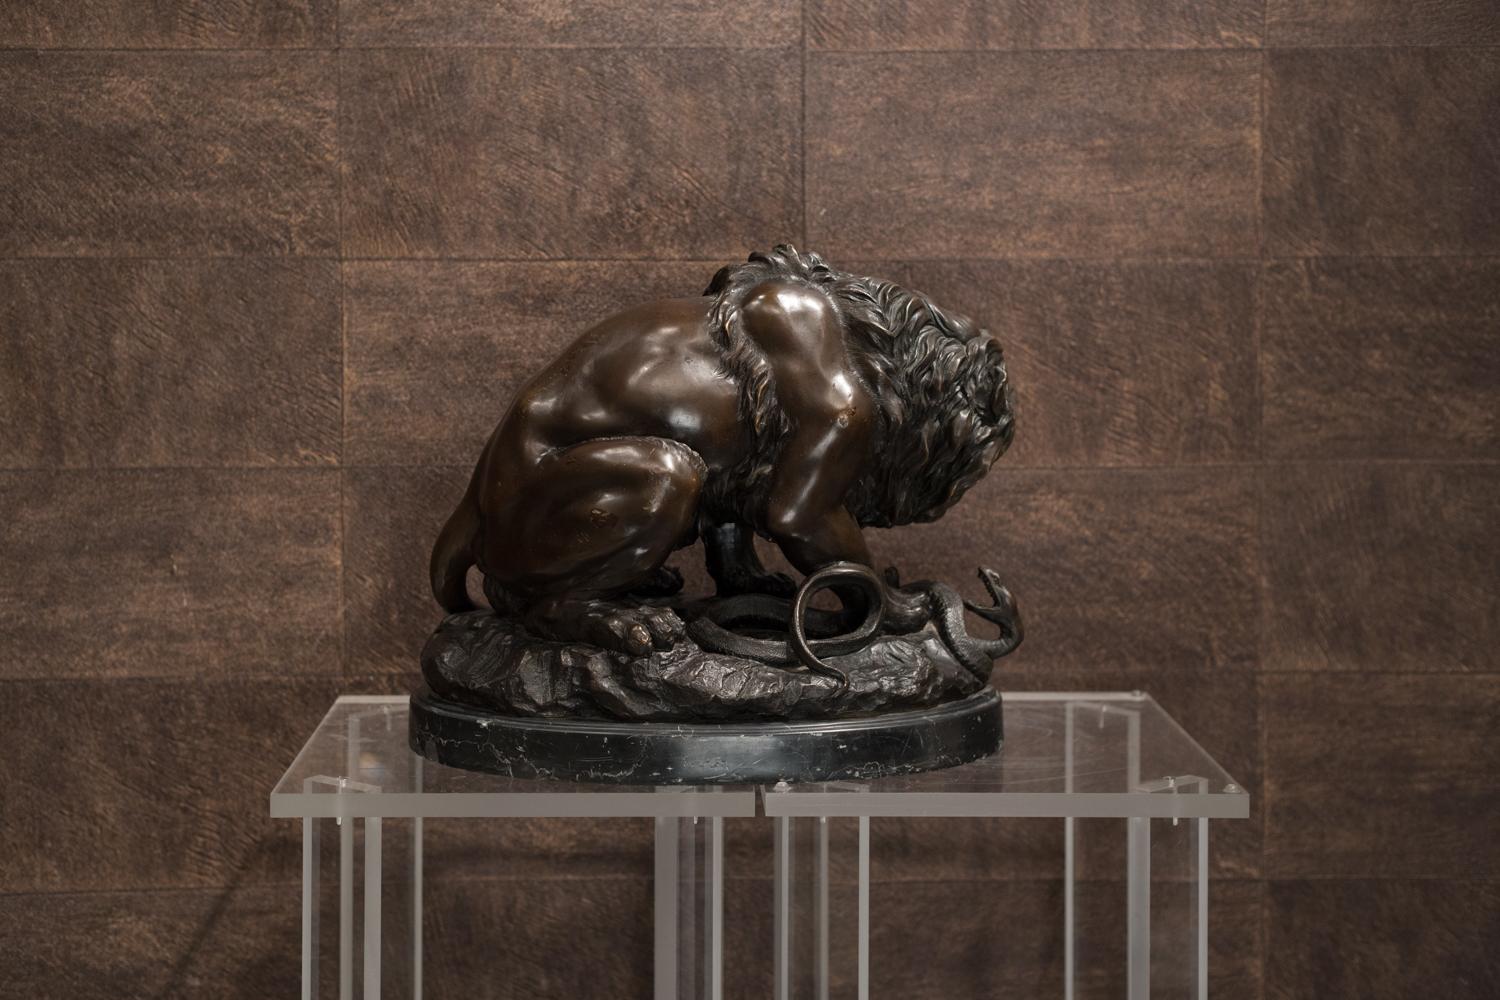 Antoine-Louis Barye (Paris 1795-1875).
Lion crushing a Snake.
Bronze, brown patina signed Barye on the left hand side of the base.
Black marble base.
The best of Barye’s sculptures surpass mere anatomical description and resonate with human